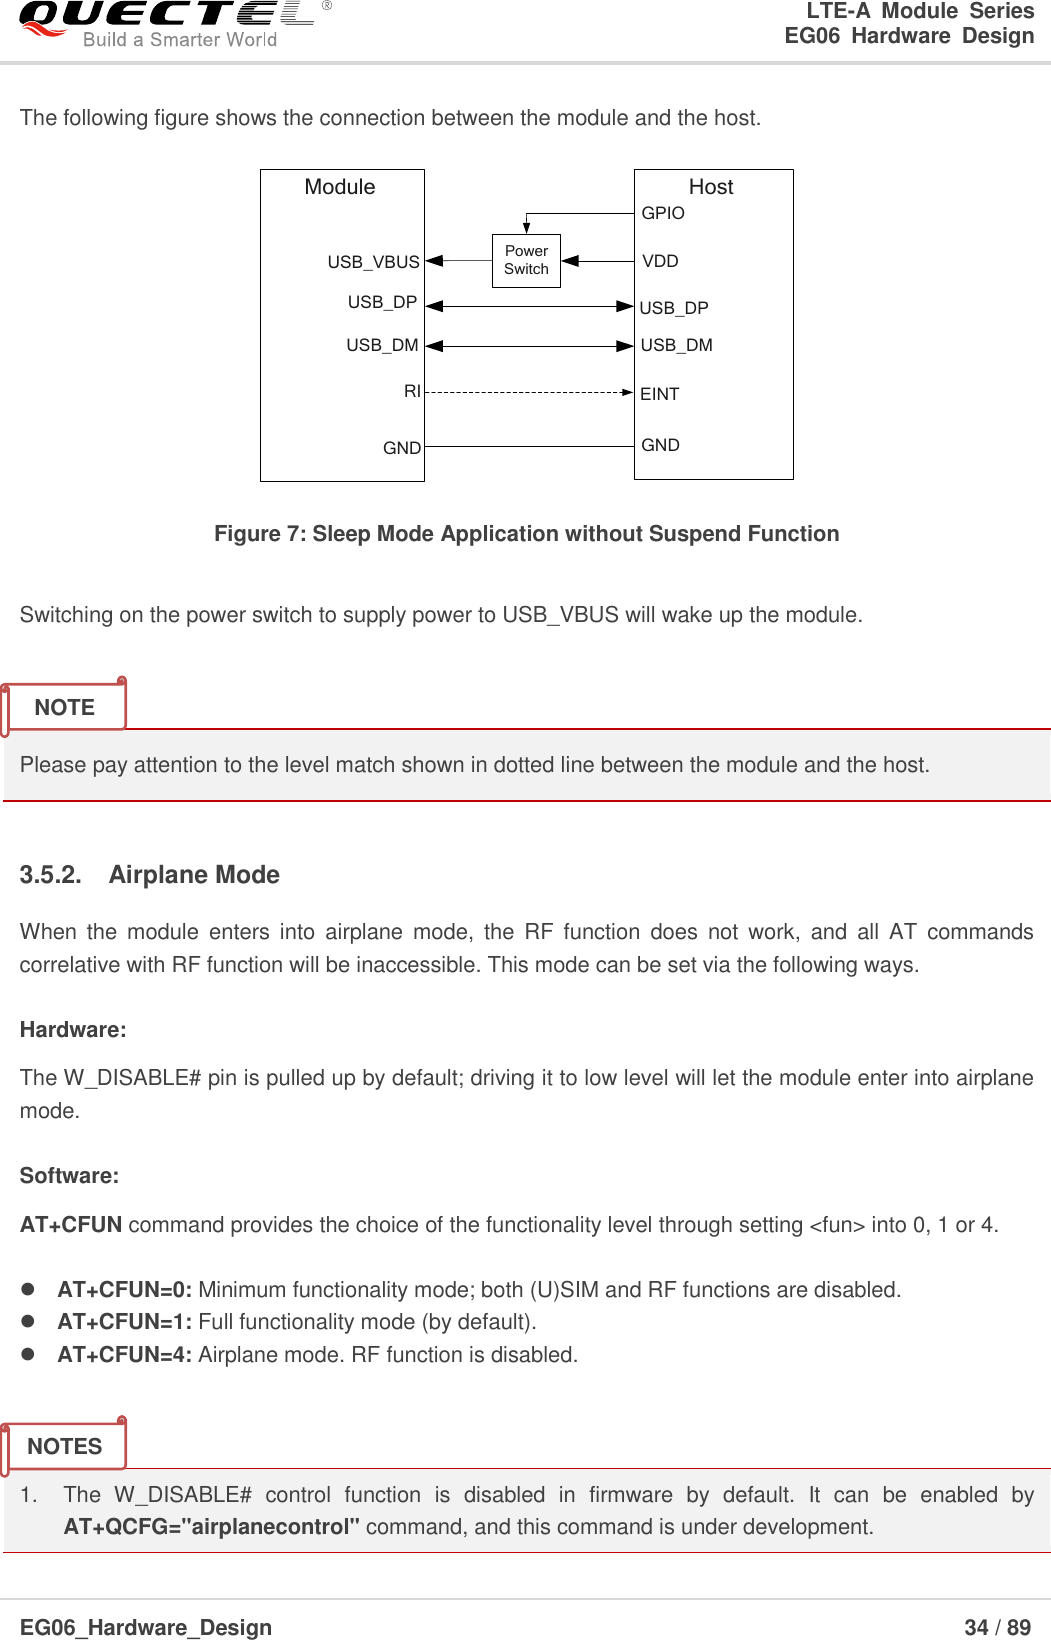 LTE-A  Module  Series                                                  EG06  Hardware  Design  EG06_Hardware_Design                                                               34 / 89    The following figure shows the connection between the module and the host. USB_VBUSUSB_DPUSB_DMVDDUSB_DPUSB_DMModule HostRI EINTPower SwitchGPIOGND GND Figure 7: Sleep Mode Application without Suspend Function  Switching on the power switch to supply power to USB_VBUS will wake up the module.   Please pay attention to the level match shown in dotted line between the module and the host.    3.5.2.  Airplane Mode When  the  module  enters  into  airplane  mode,  the  RF  function  does  not  work,  and  all  AT  commands correlative with RF function will be inaccessible. This mode can be set via the following ways.  Hardware: The W_DISABLE# pin is pulled up by default; driving it to low level will let the module enter into airplane mode.  Software: AT+CFUN command provides the choice of the functionality level through setting &lt;fun&gt; into 0, 1 or 4.   AT+CFUN=0: Minimum functionality mode; both (U)SIM and RF functions are disabled.  AT+CFUN=1: Full functionality mode (by default).  AT+CFUN=4: Airplane mode. RF function is disabled.   1.  The  W_DISABLE#  control  function  is  disabled  in  firmware  by  default.  It  can  be  enabled  by AT+QCFG=&quot;airplanecontrol&quot; command, and this command is under development. NOTES NOTE 